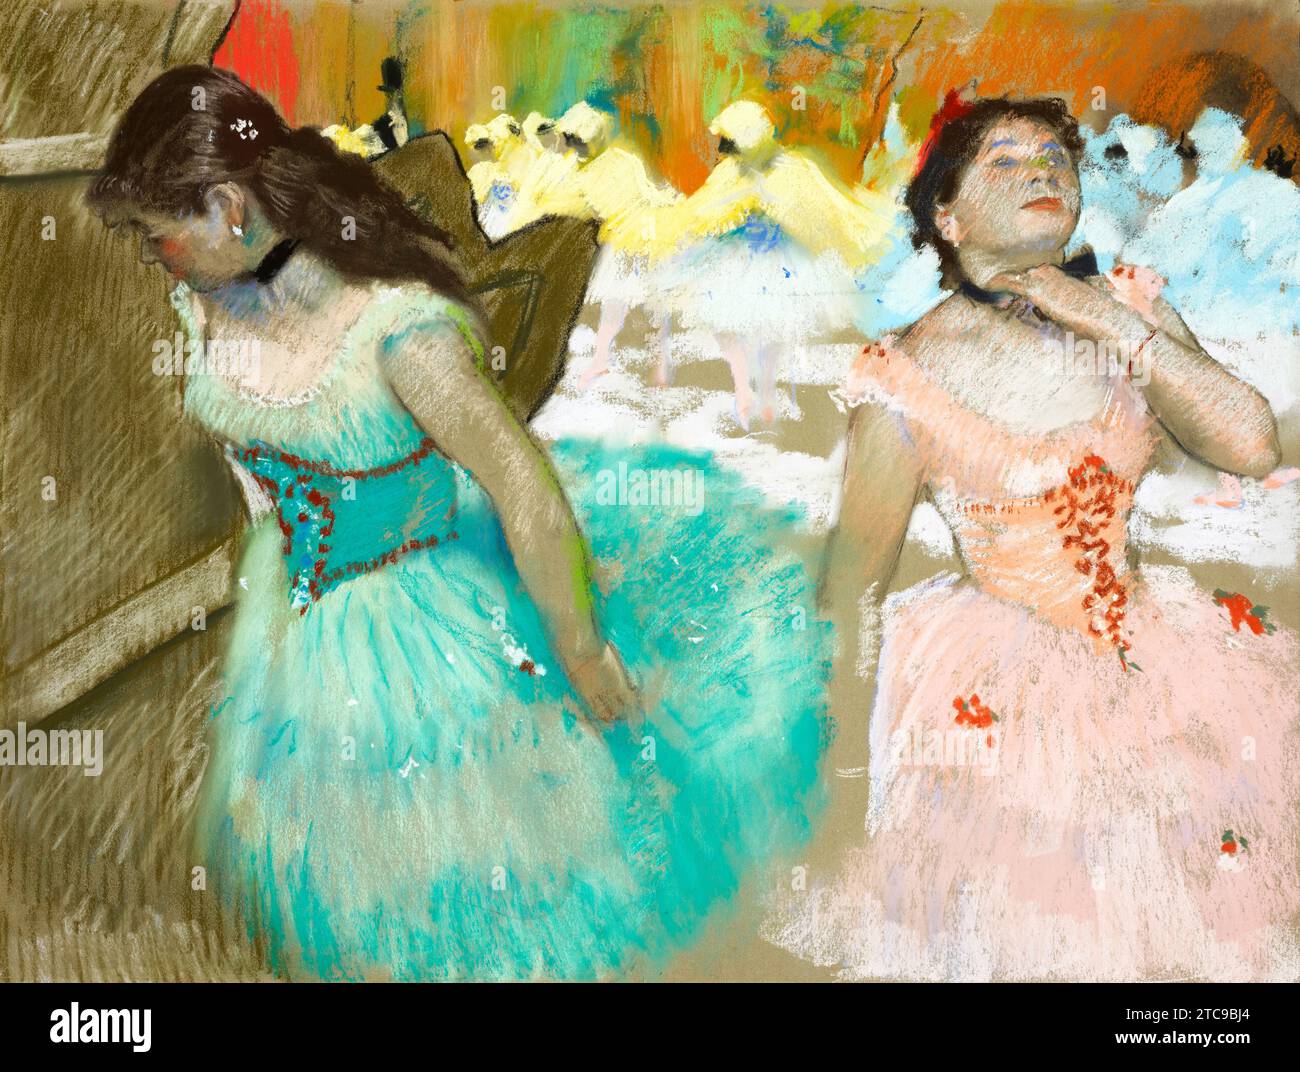 Edgar Degas's Entrance of the Masked Dancers famous painting. Stock Photo